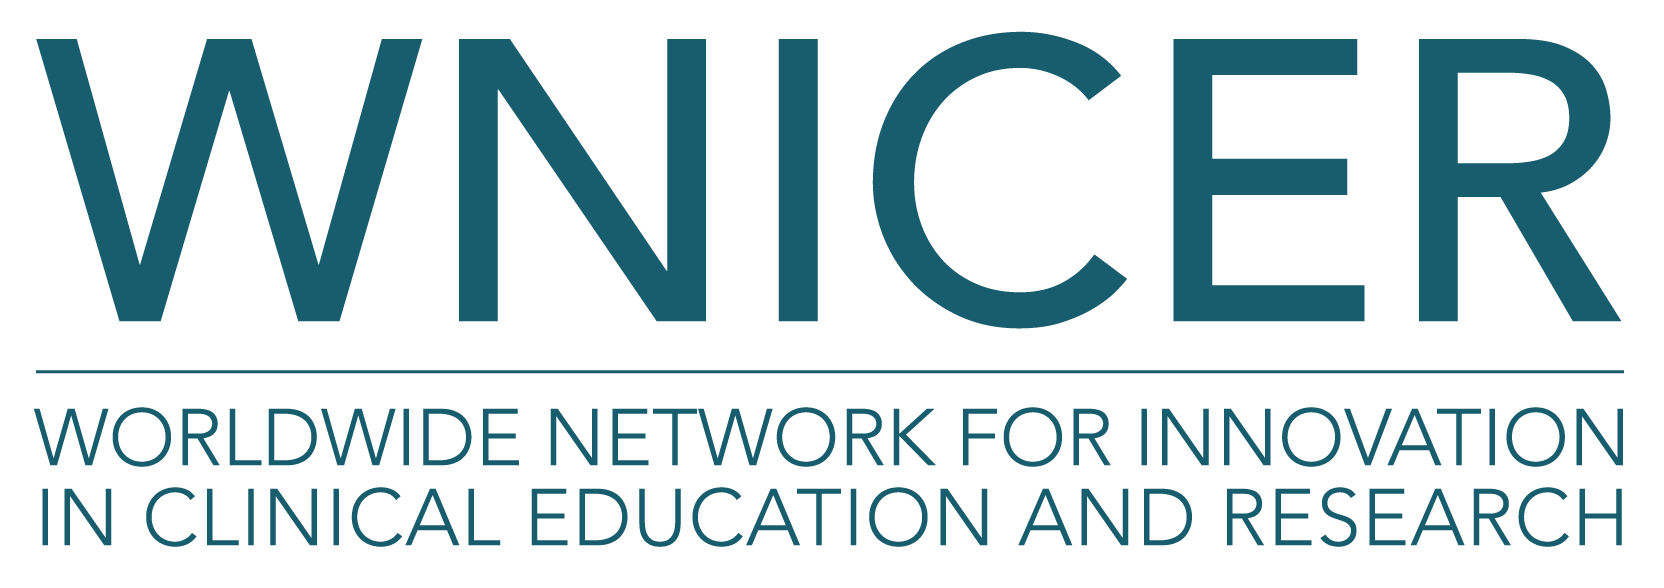 Worldwide Network for Innovation in Clinical Education and Research (WNICER)